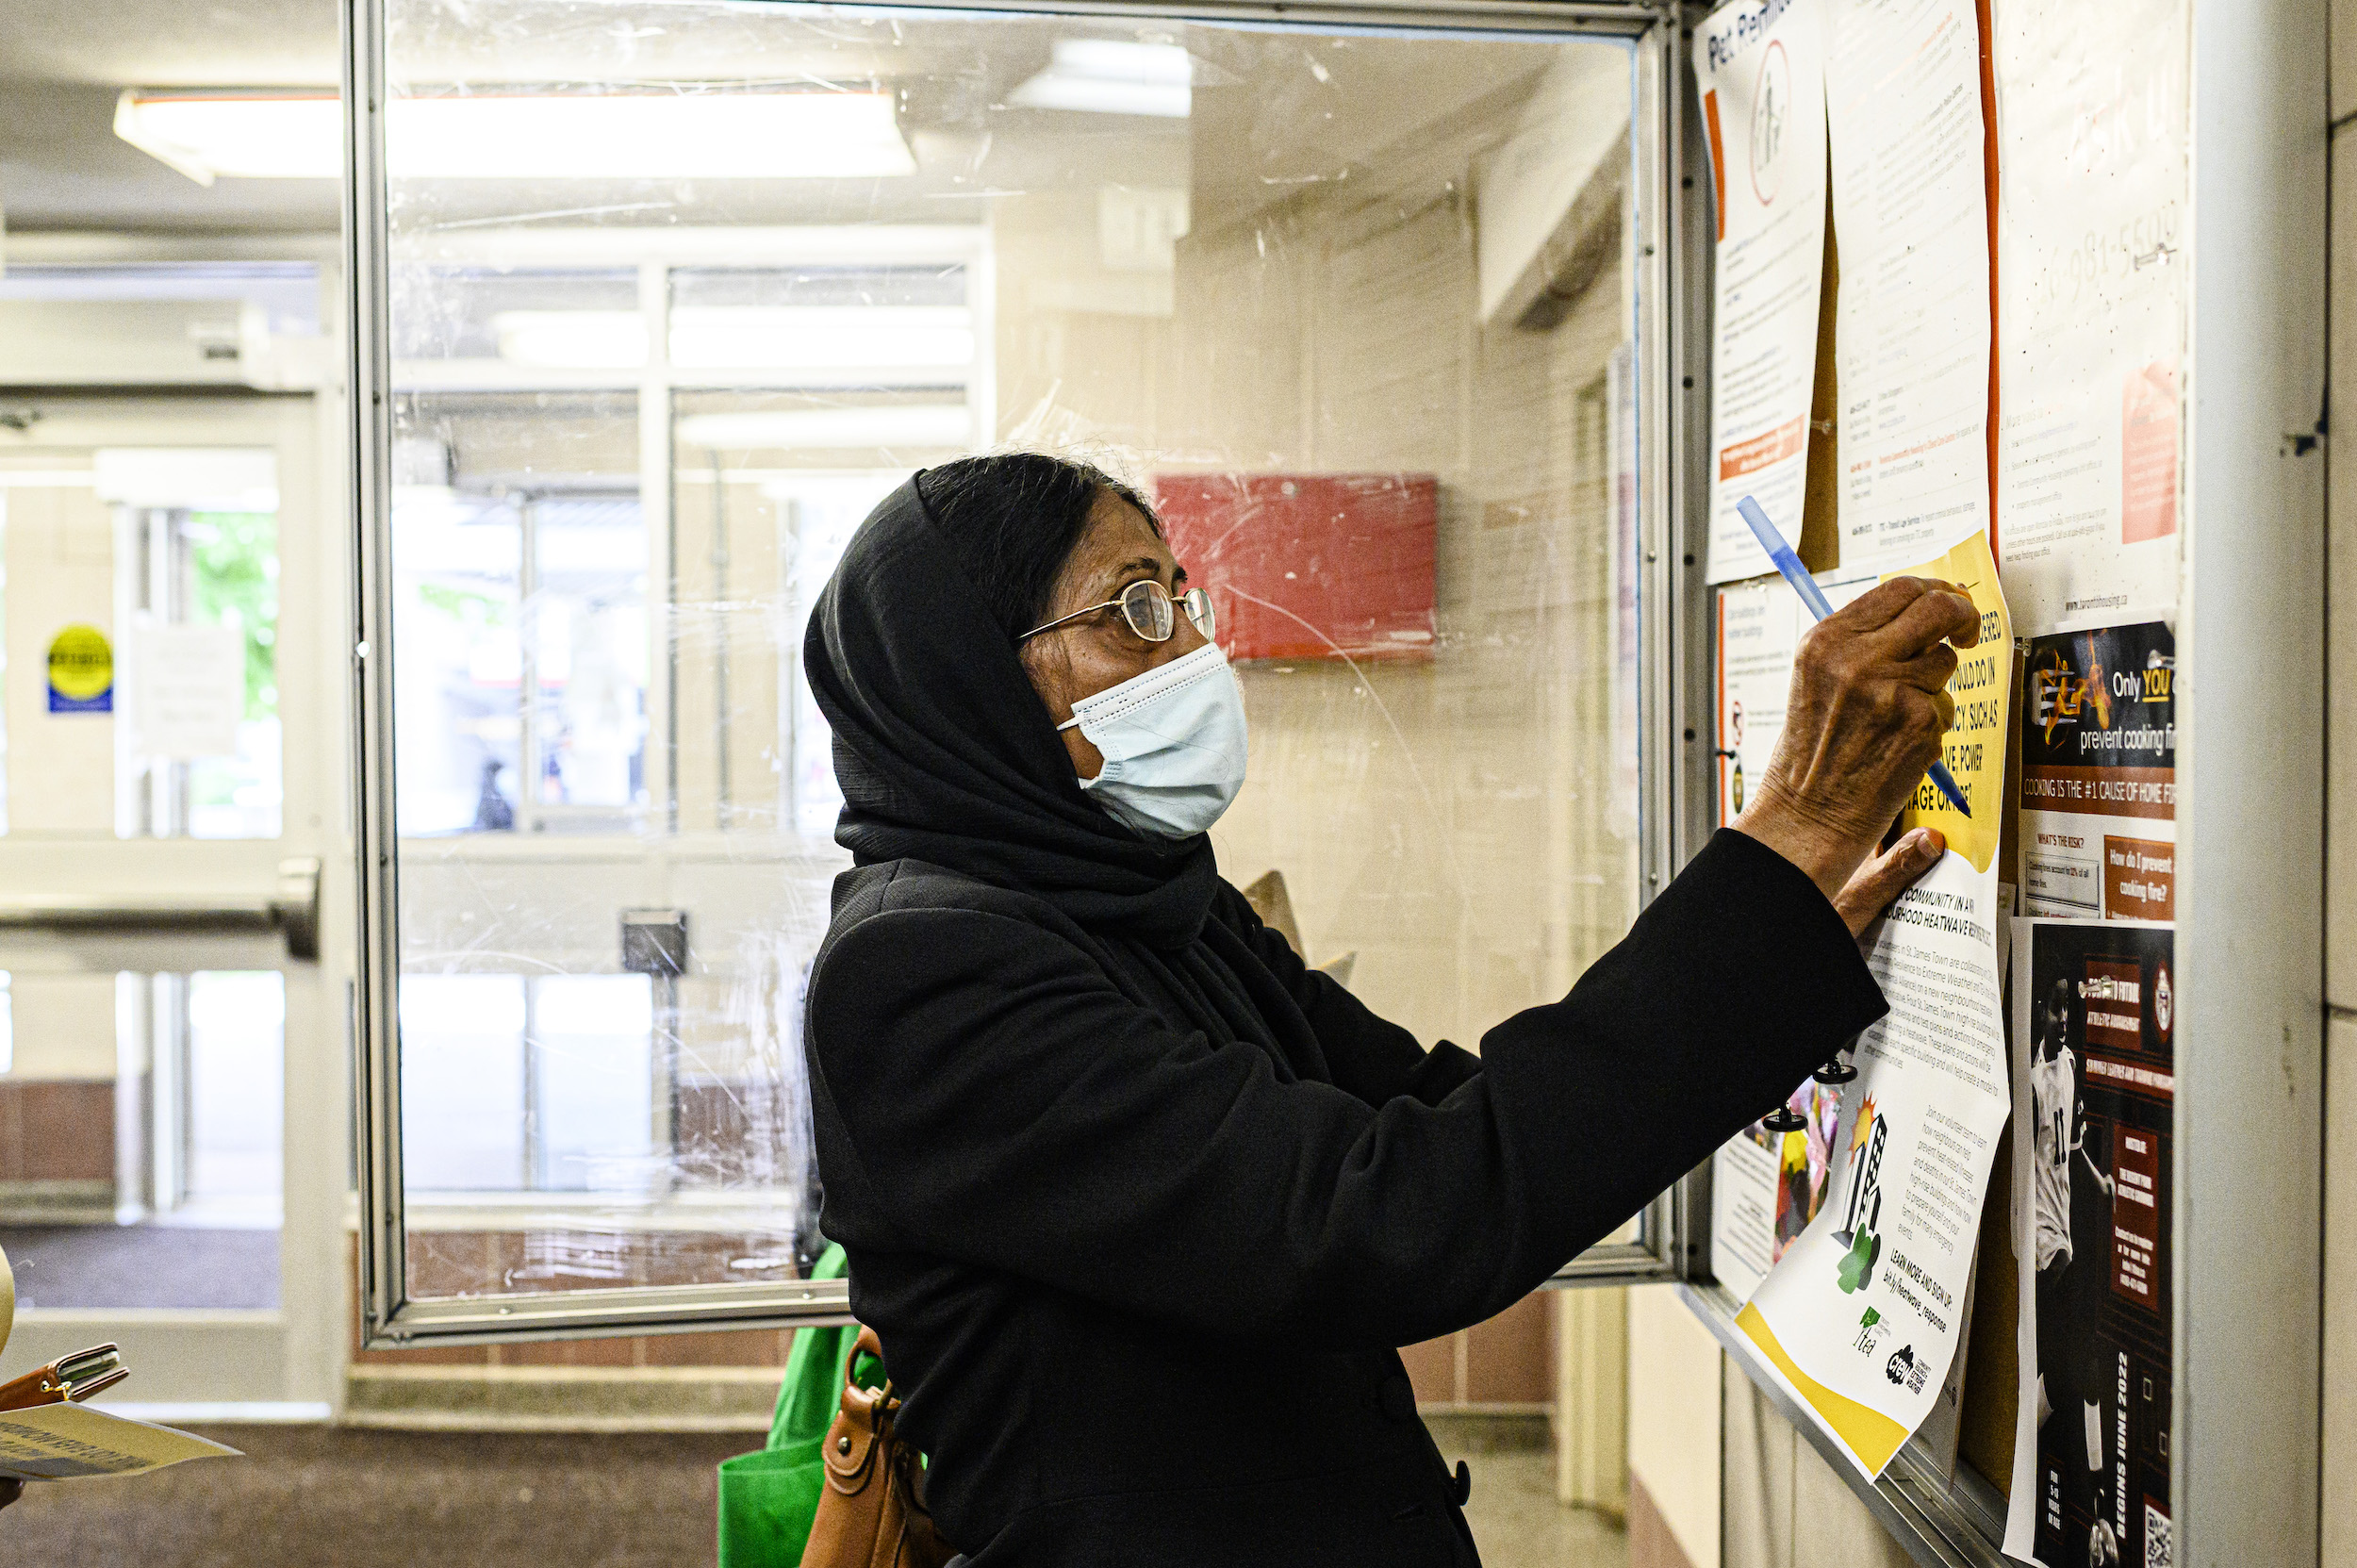 Shaheen Kausar, resident of St. James Town and volunteer with Community Resilience to Extreme Weather (CREW), posts a bulletin in a residential building lobby, in St. James Town.